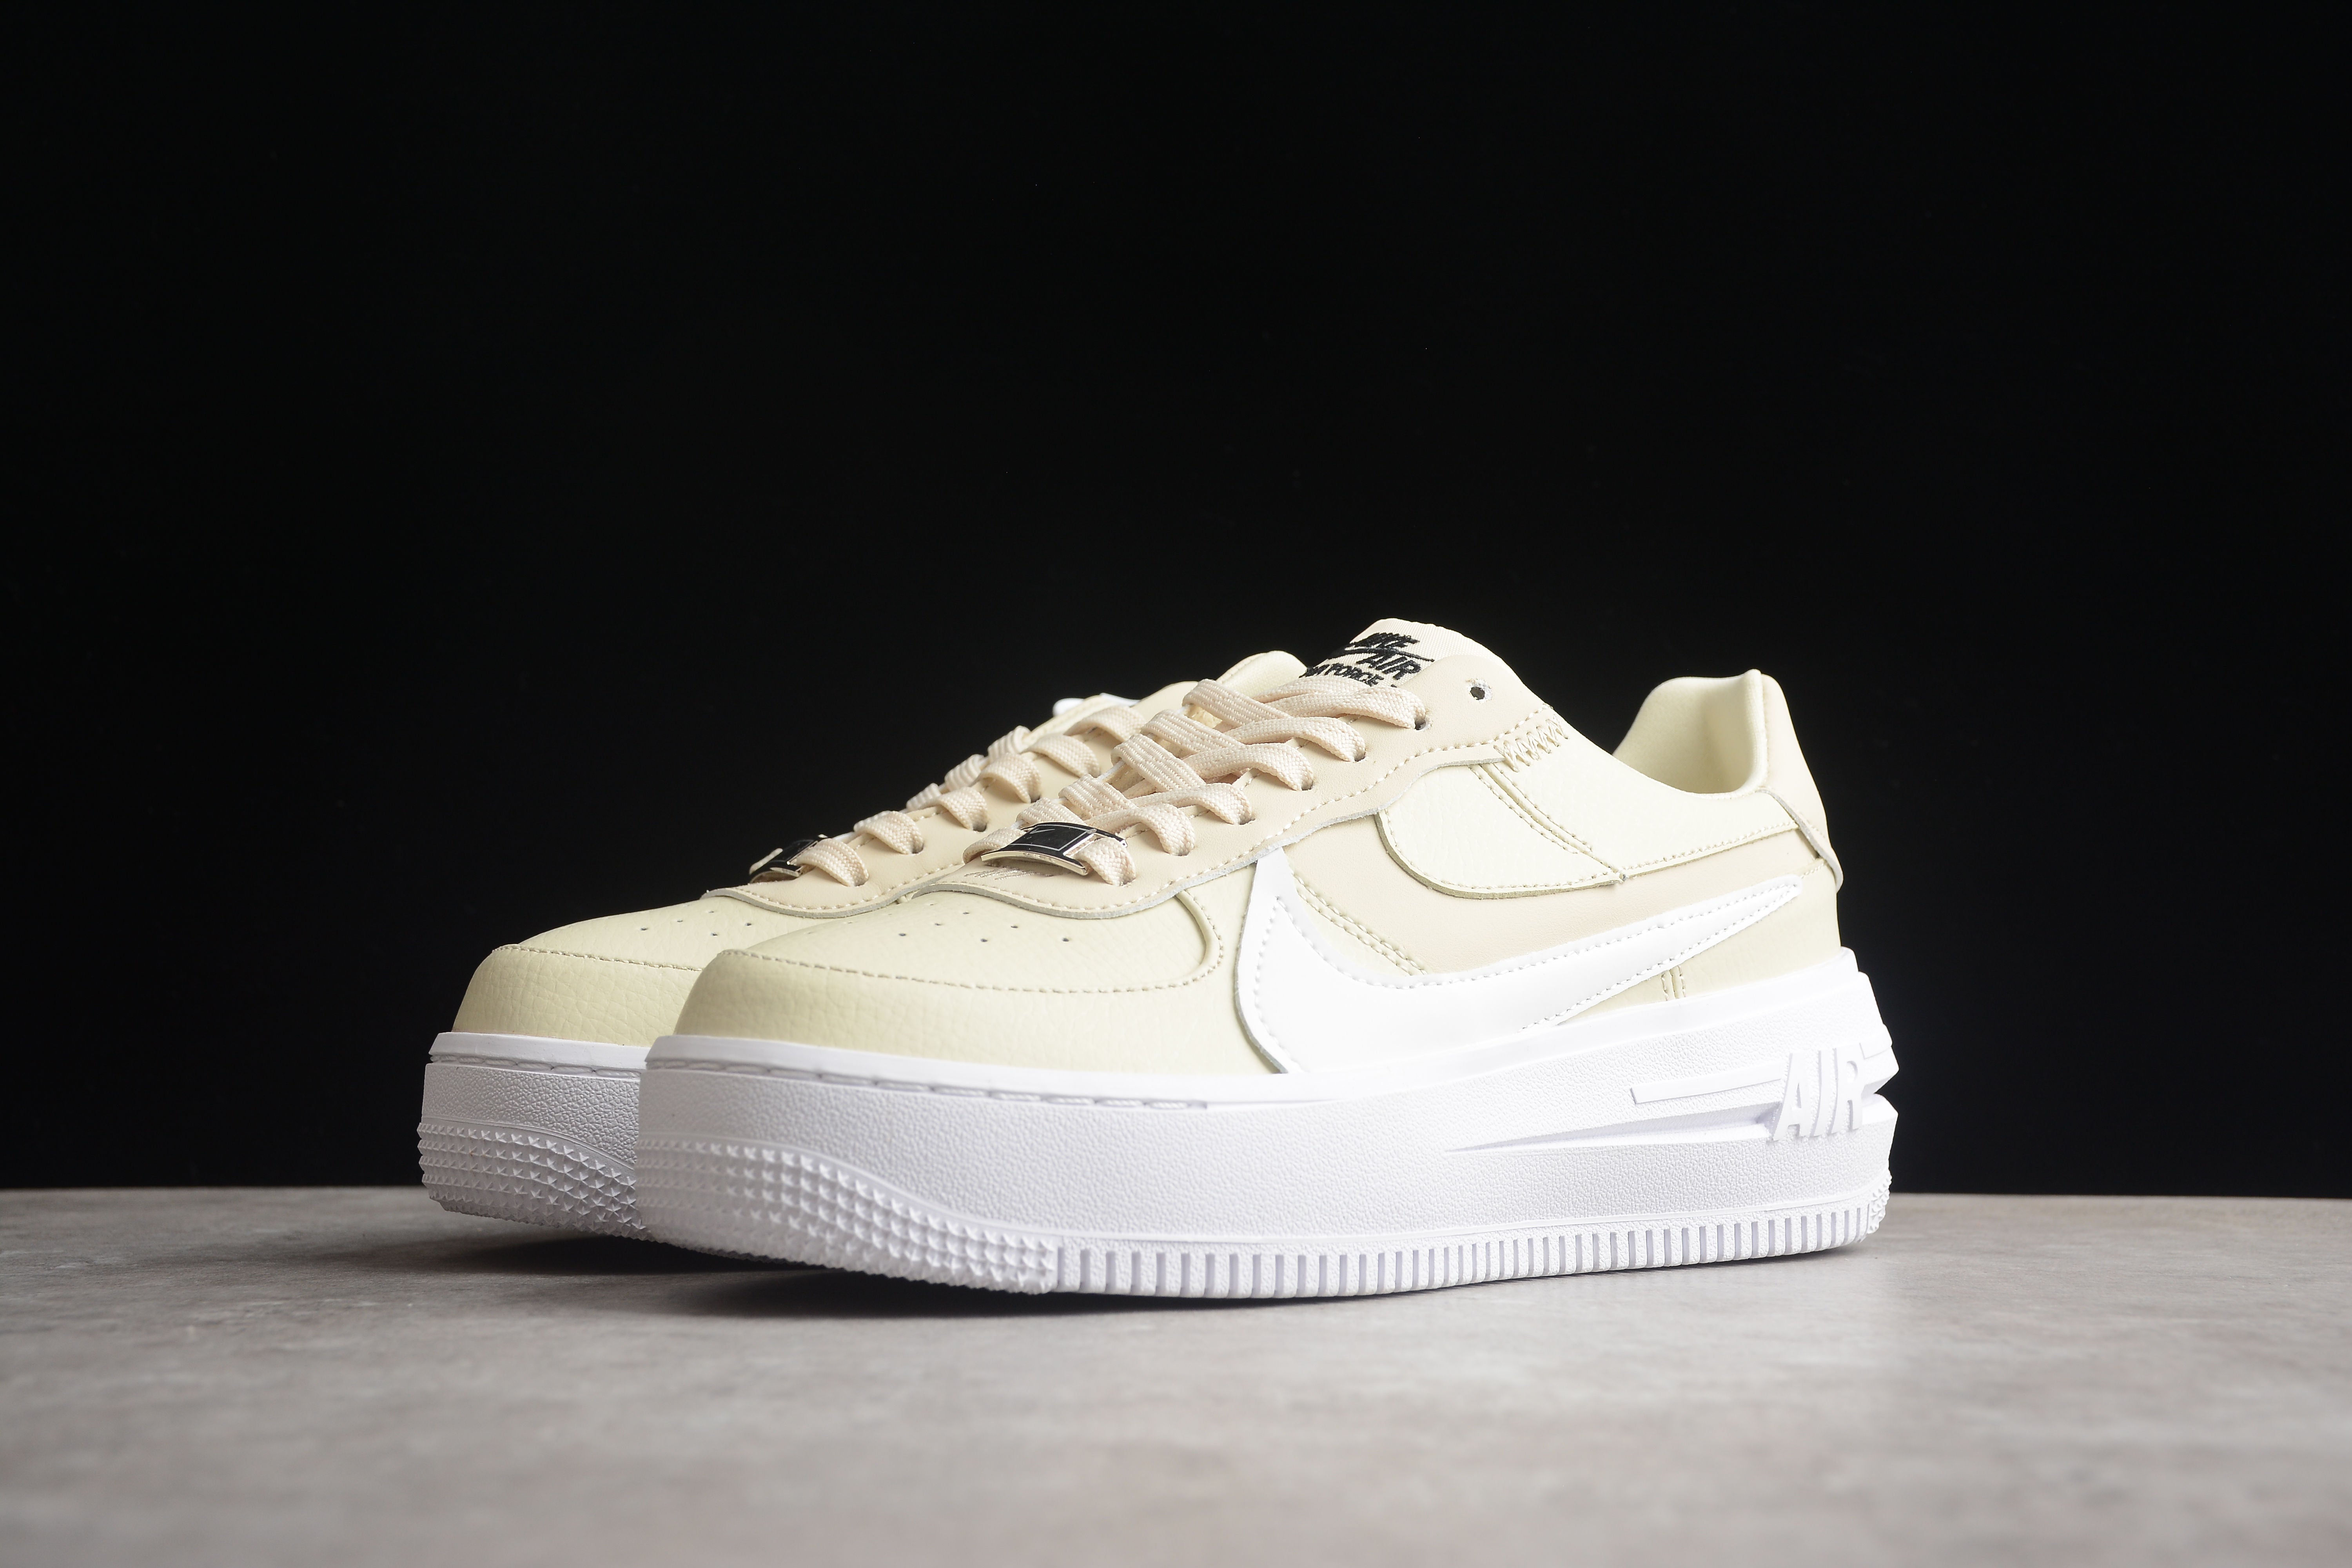 Nike airforce A1 beige shoes